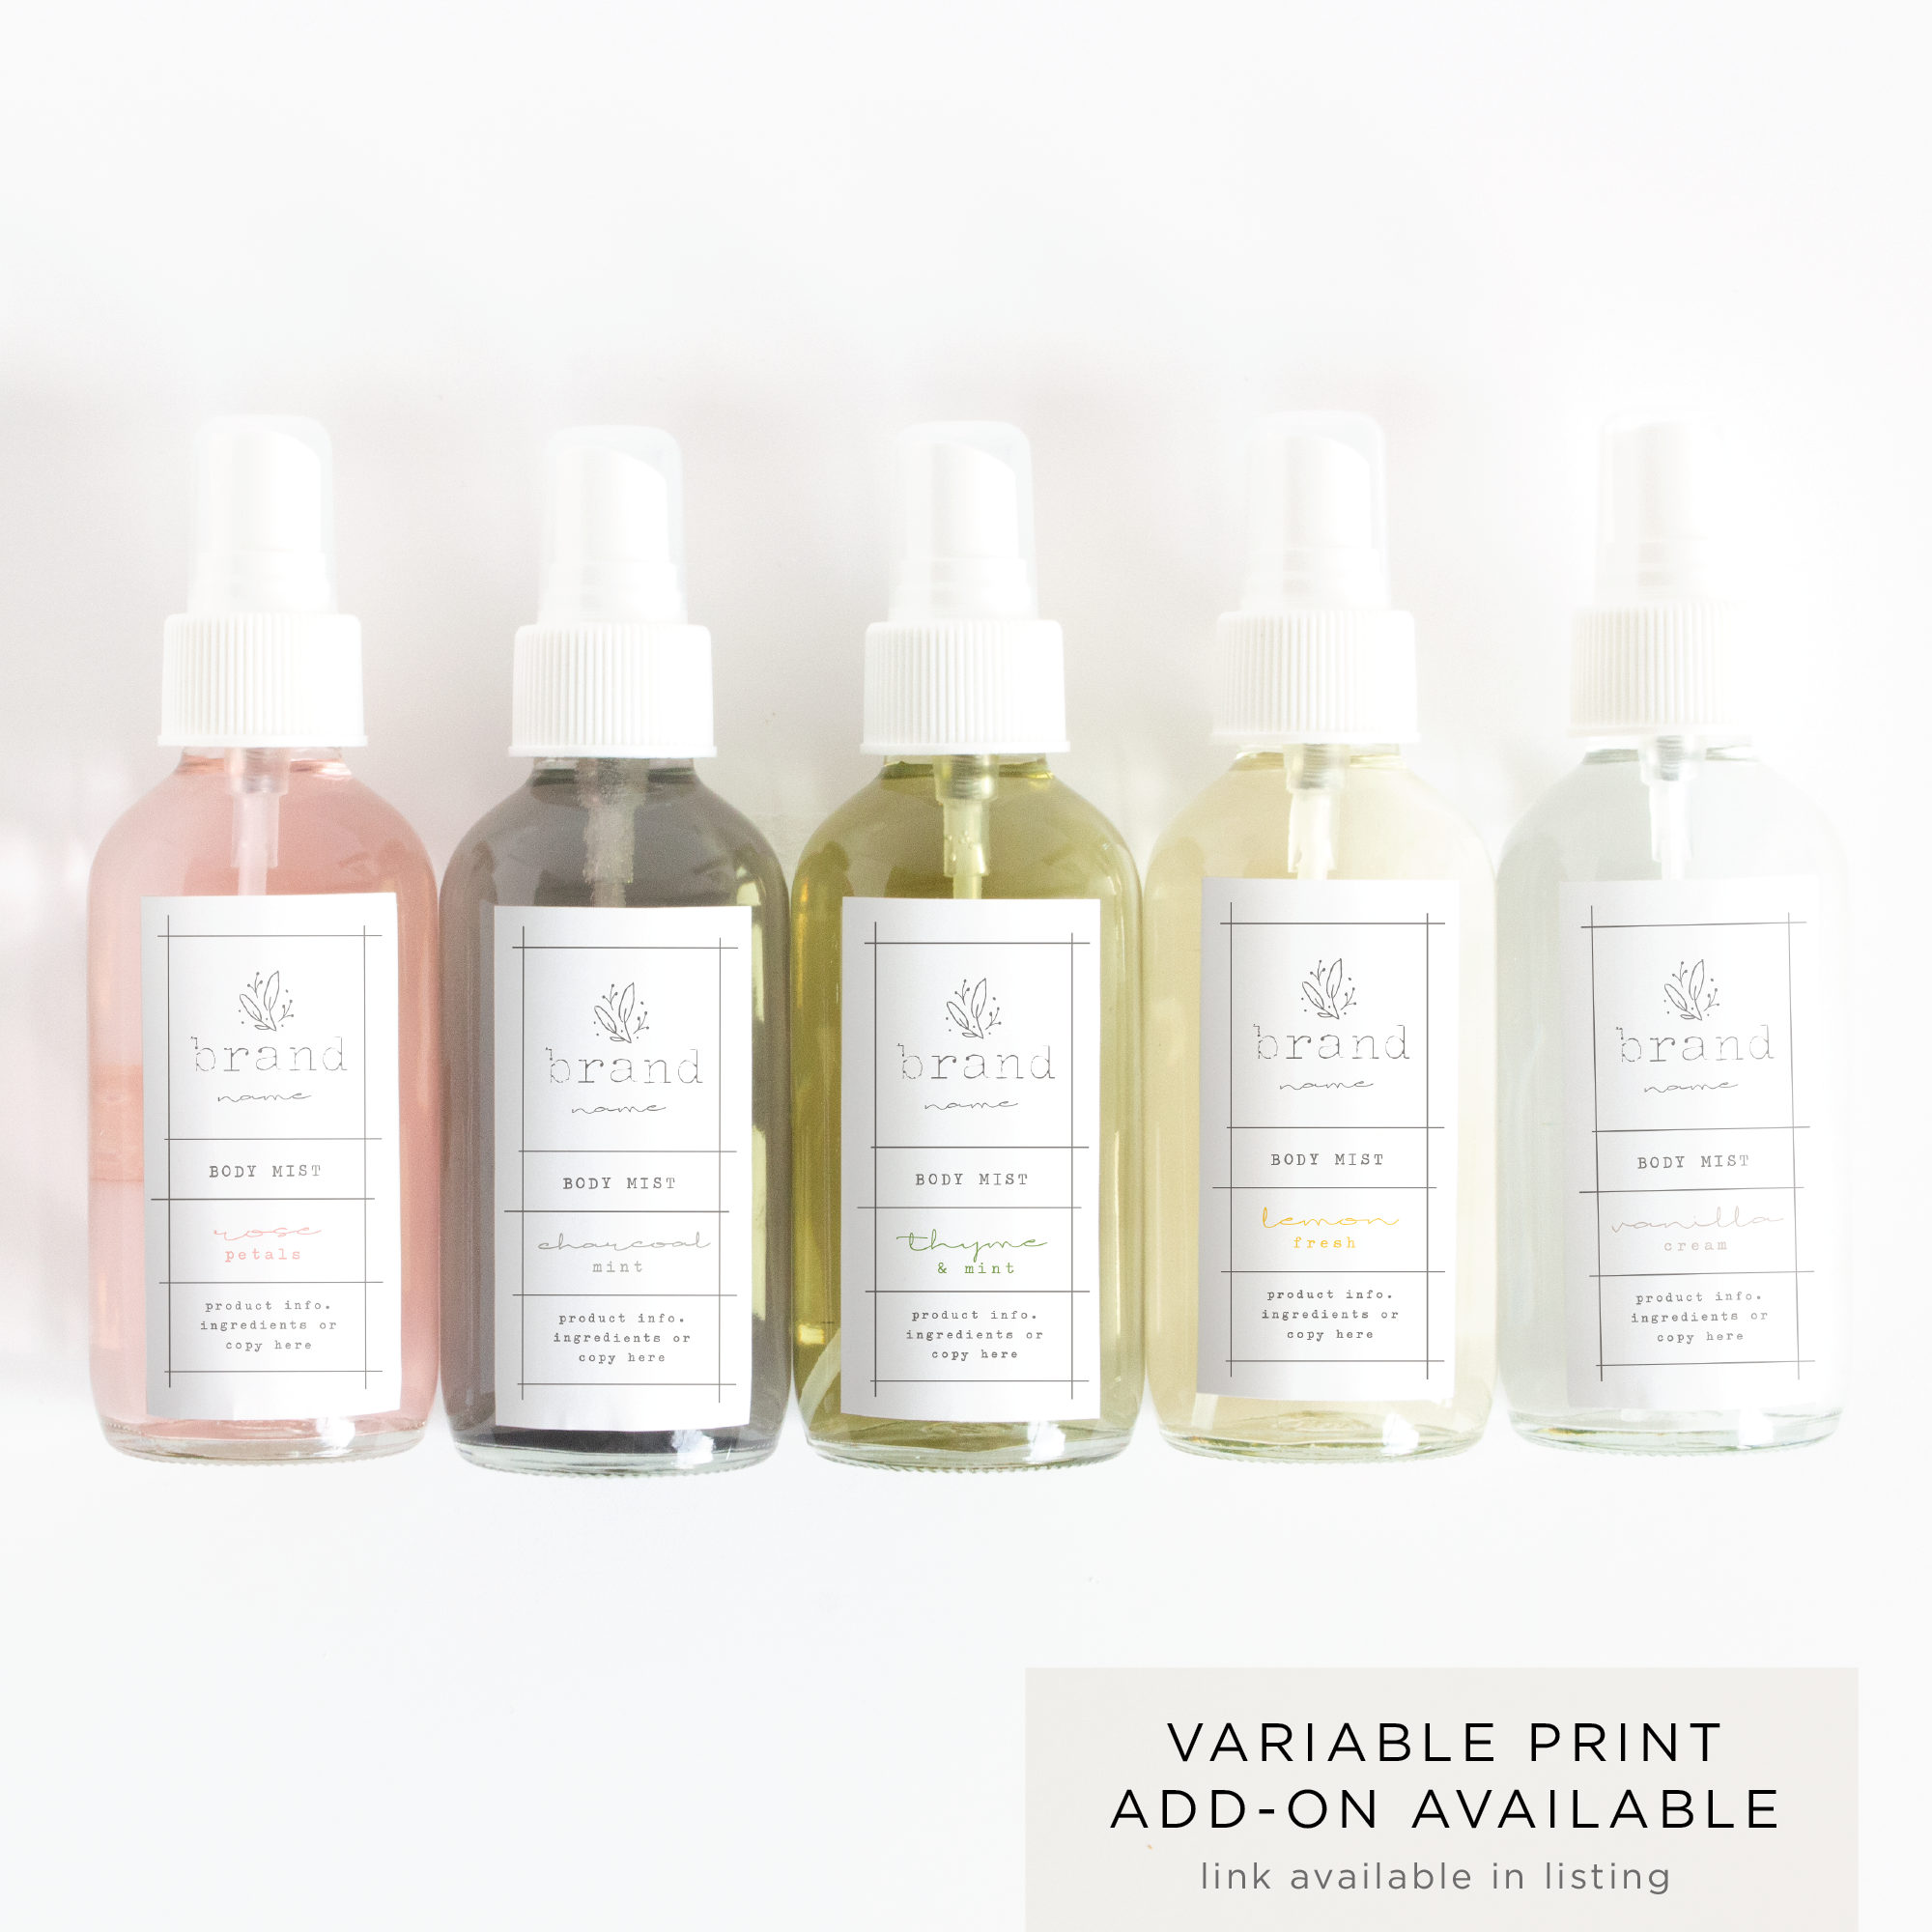 Harlow Street Vertical Product Label